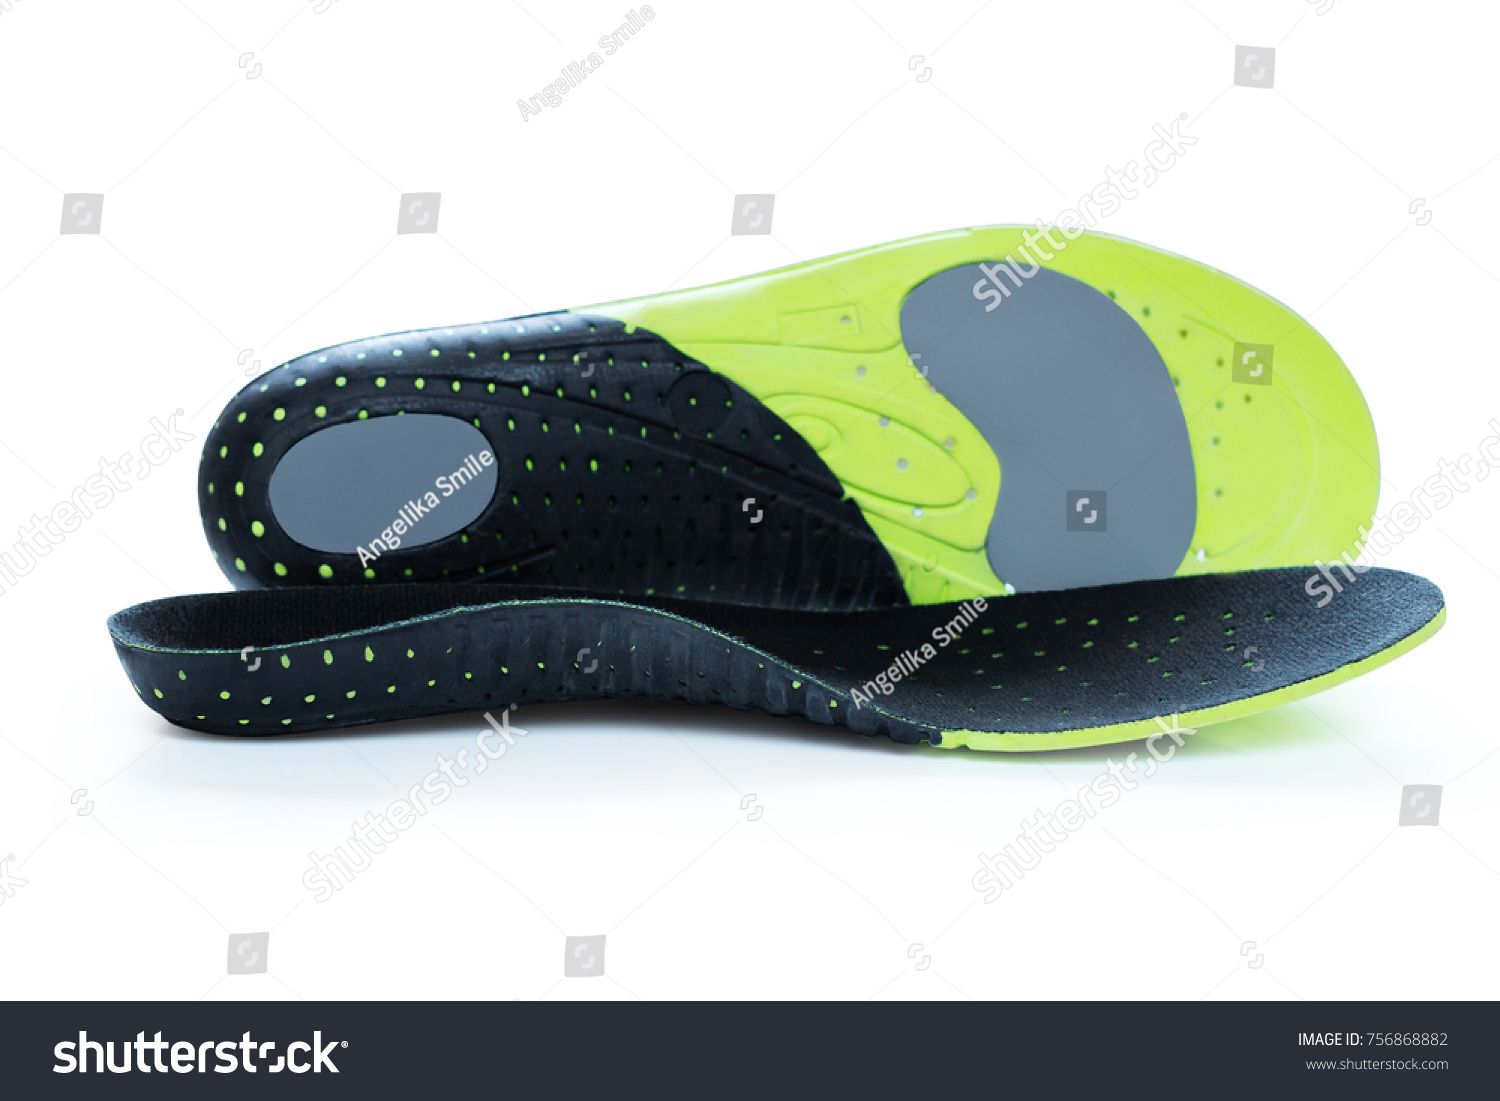 insoles for athletic shoes